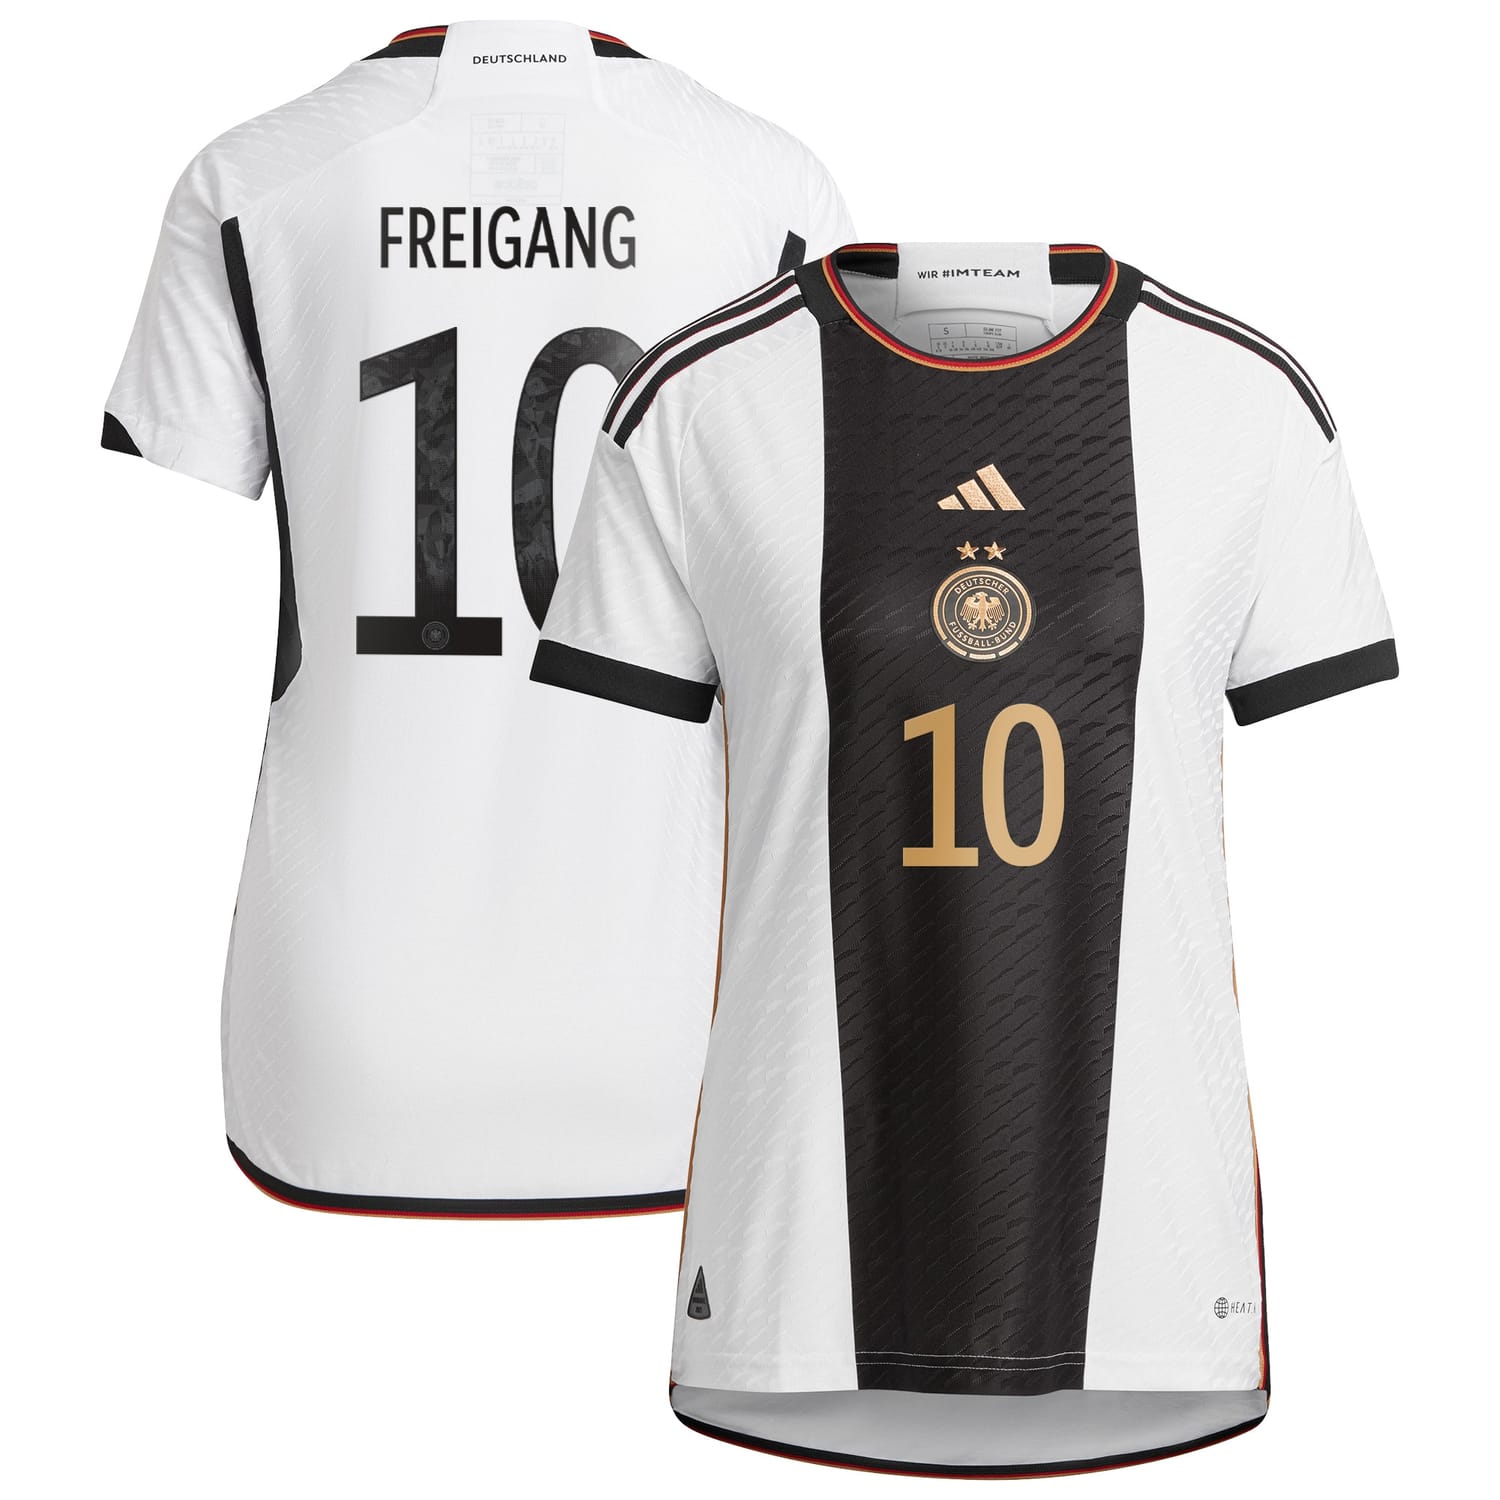 Germany National Team Home Authentic Jersey Shirt player Laura Freigang 10 printing for Women